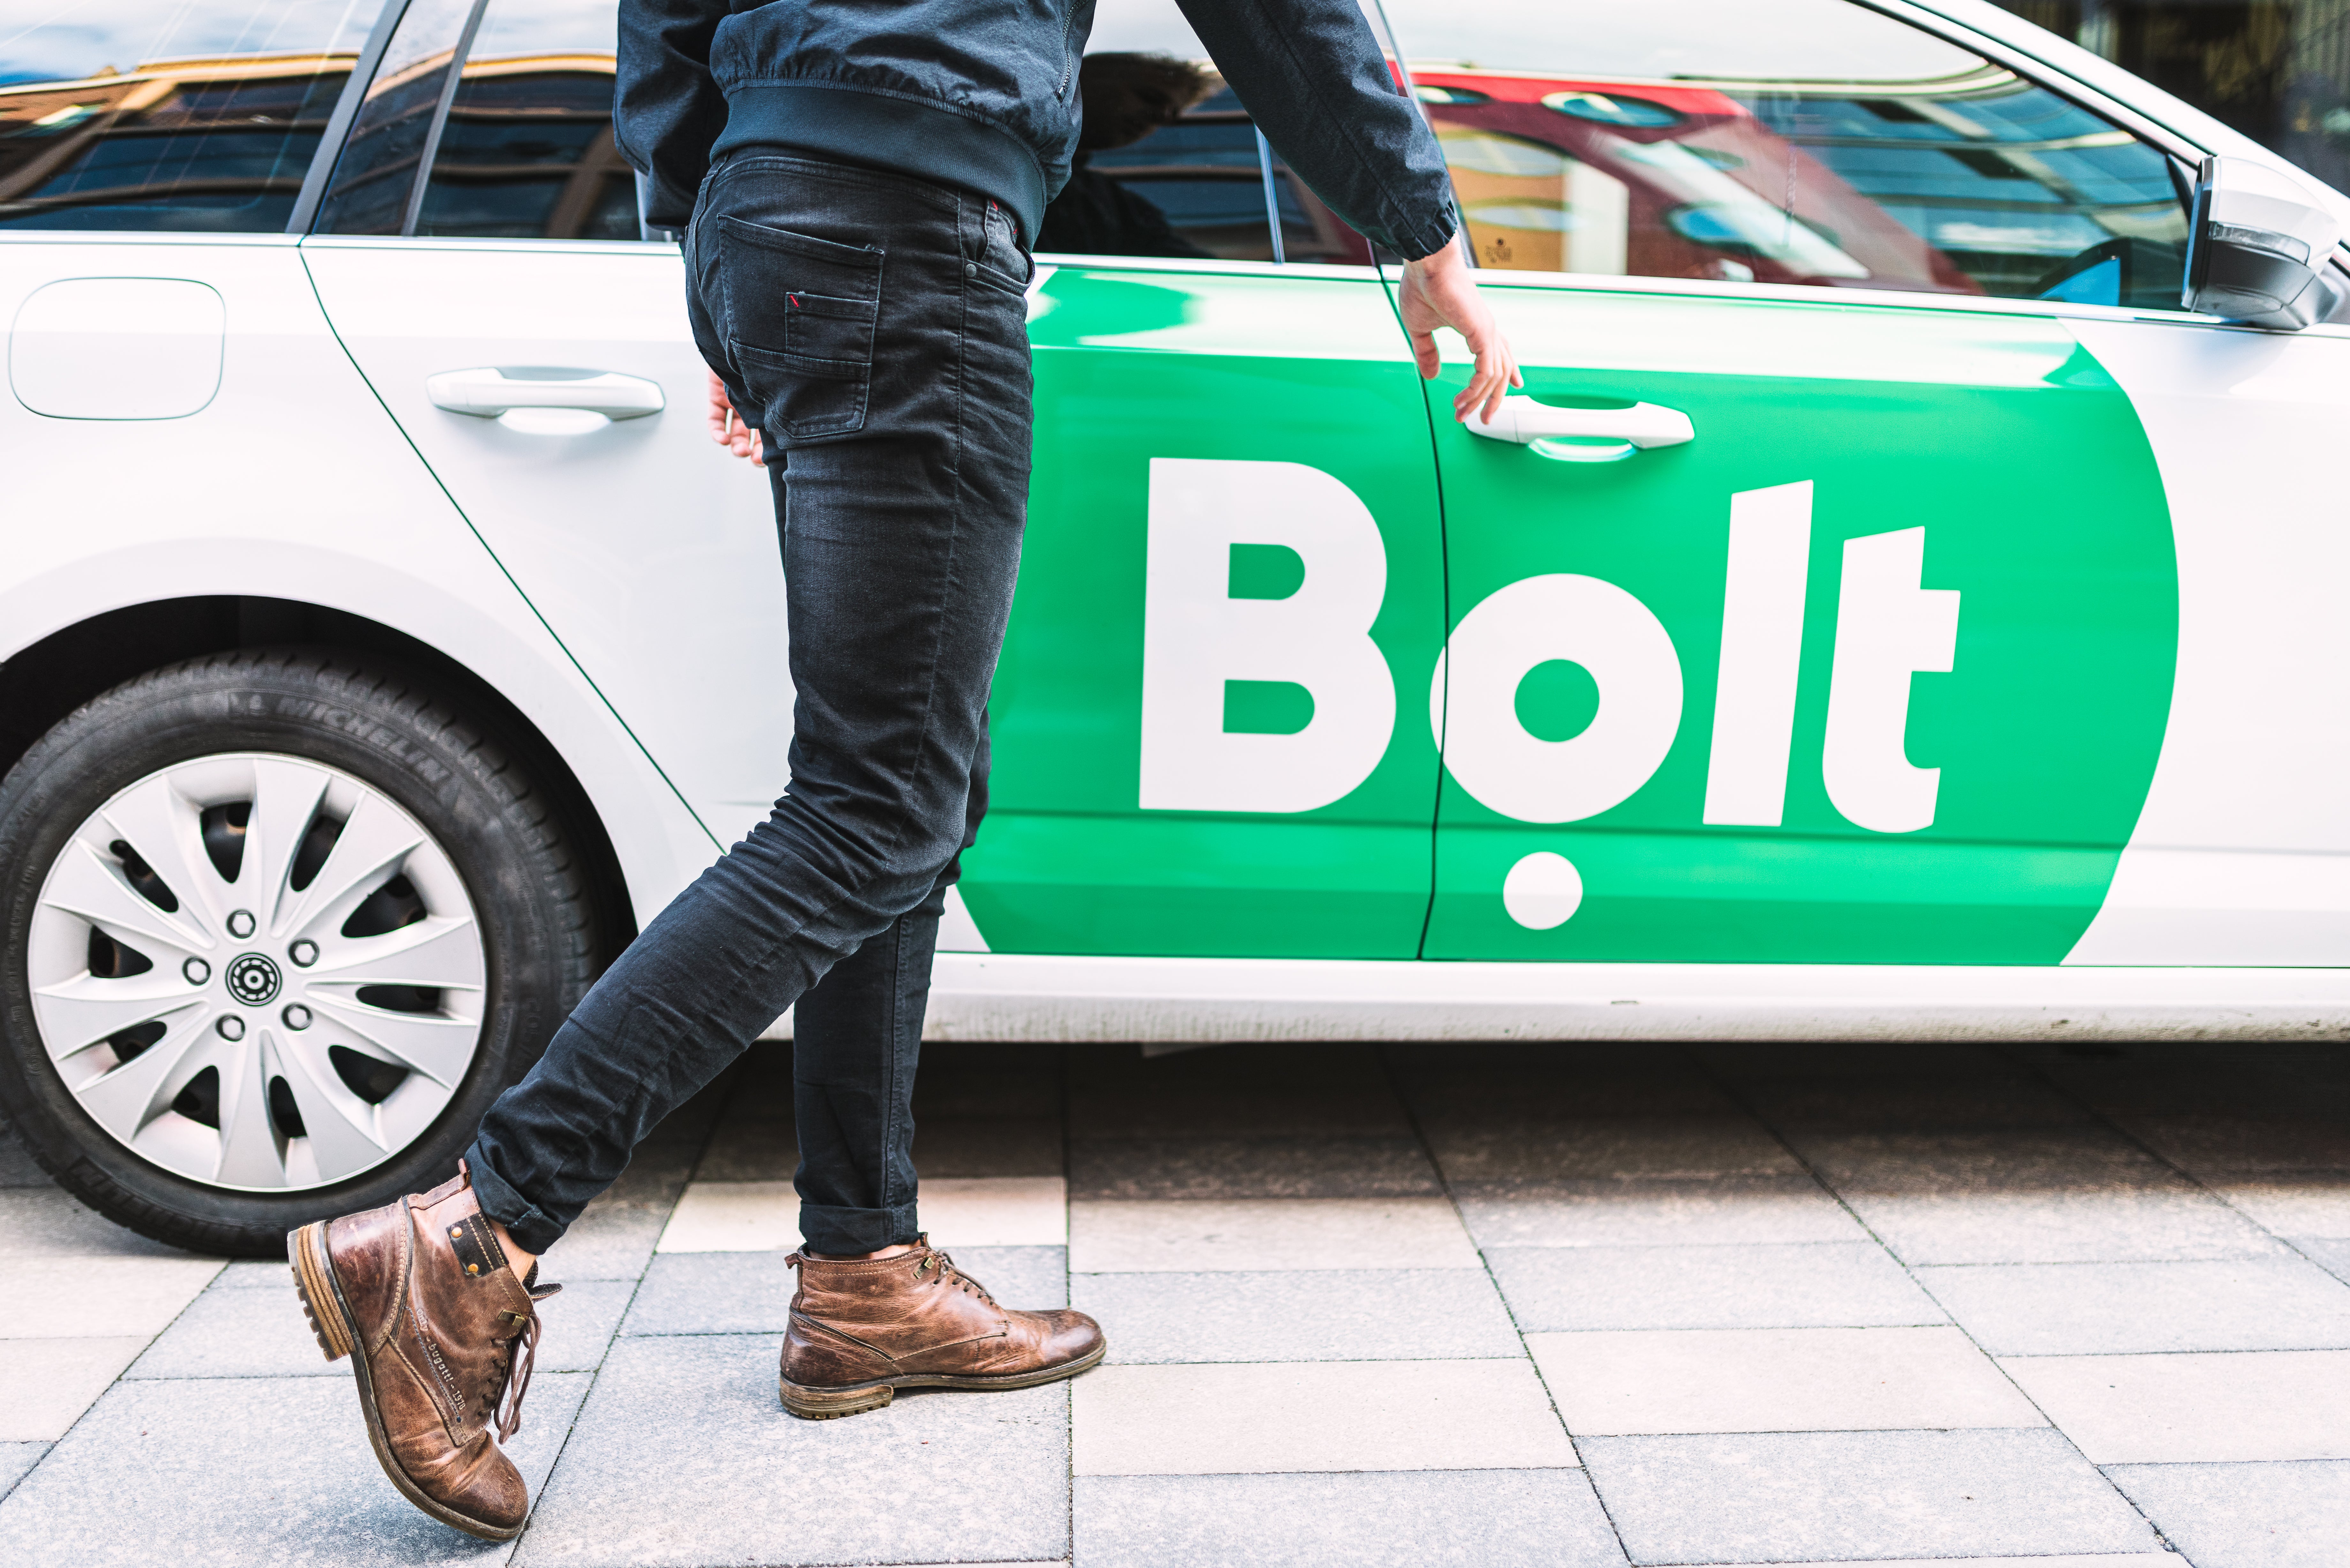 Minicab hailing app firm Bolt has announced it will allow drivers to set their own prices (Bolt/PA)